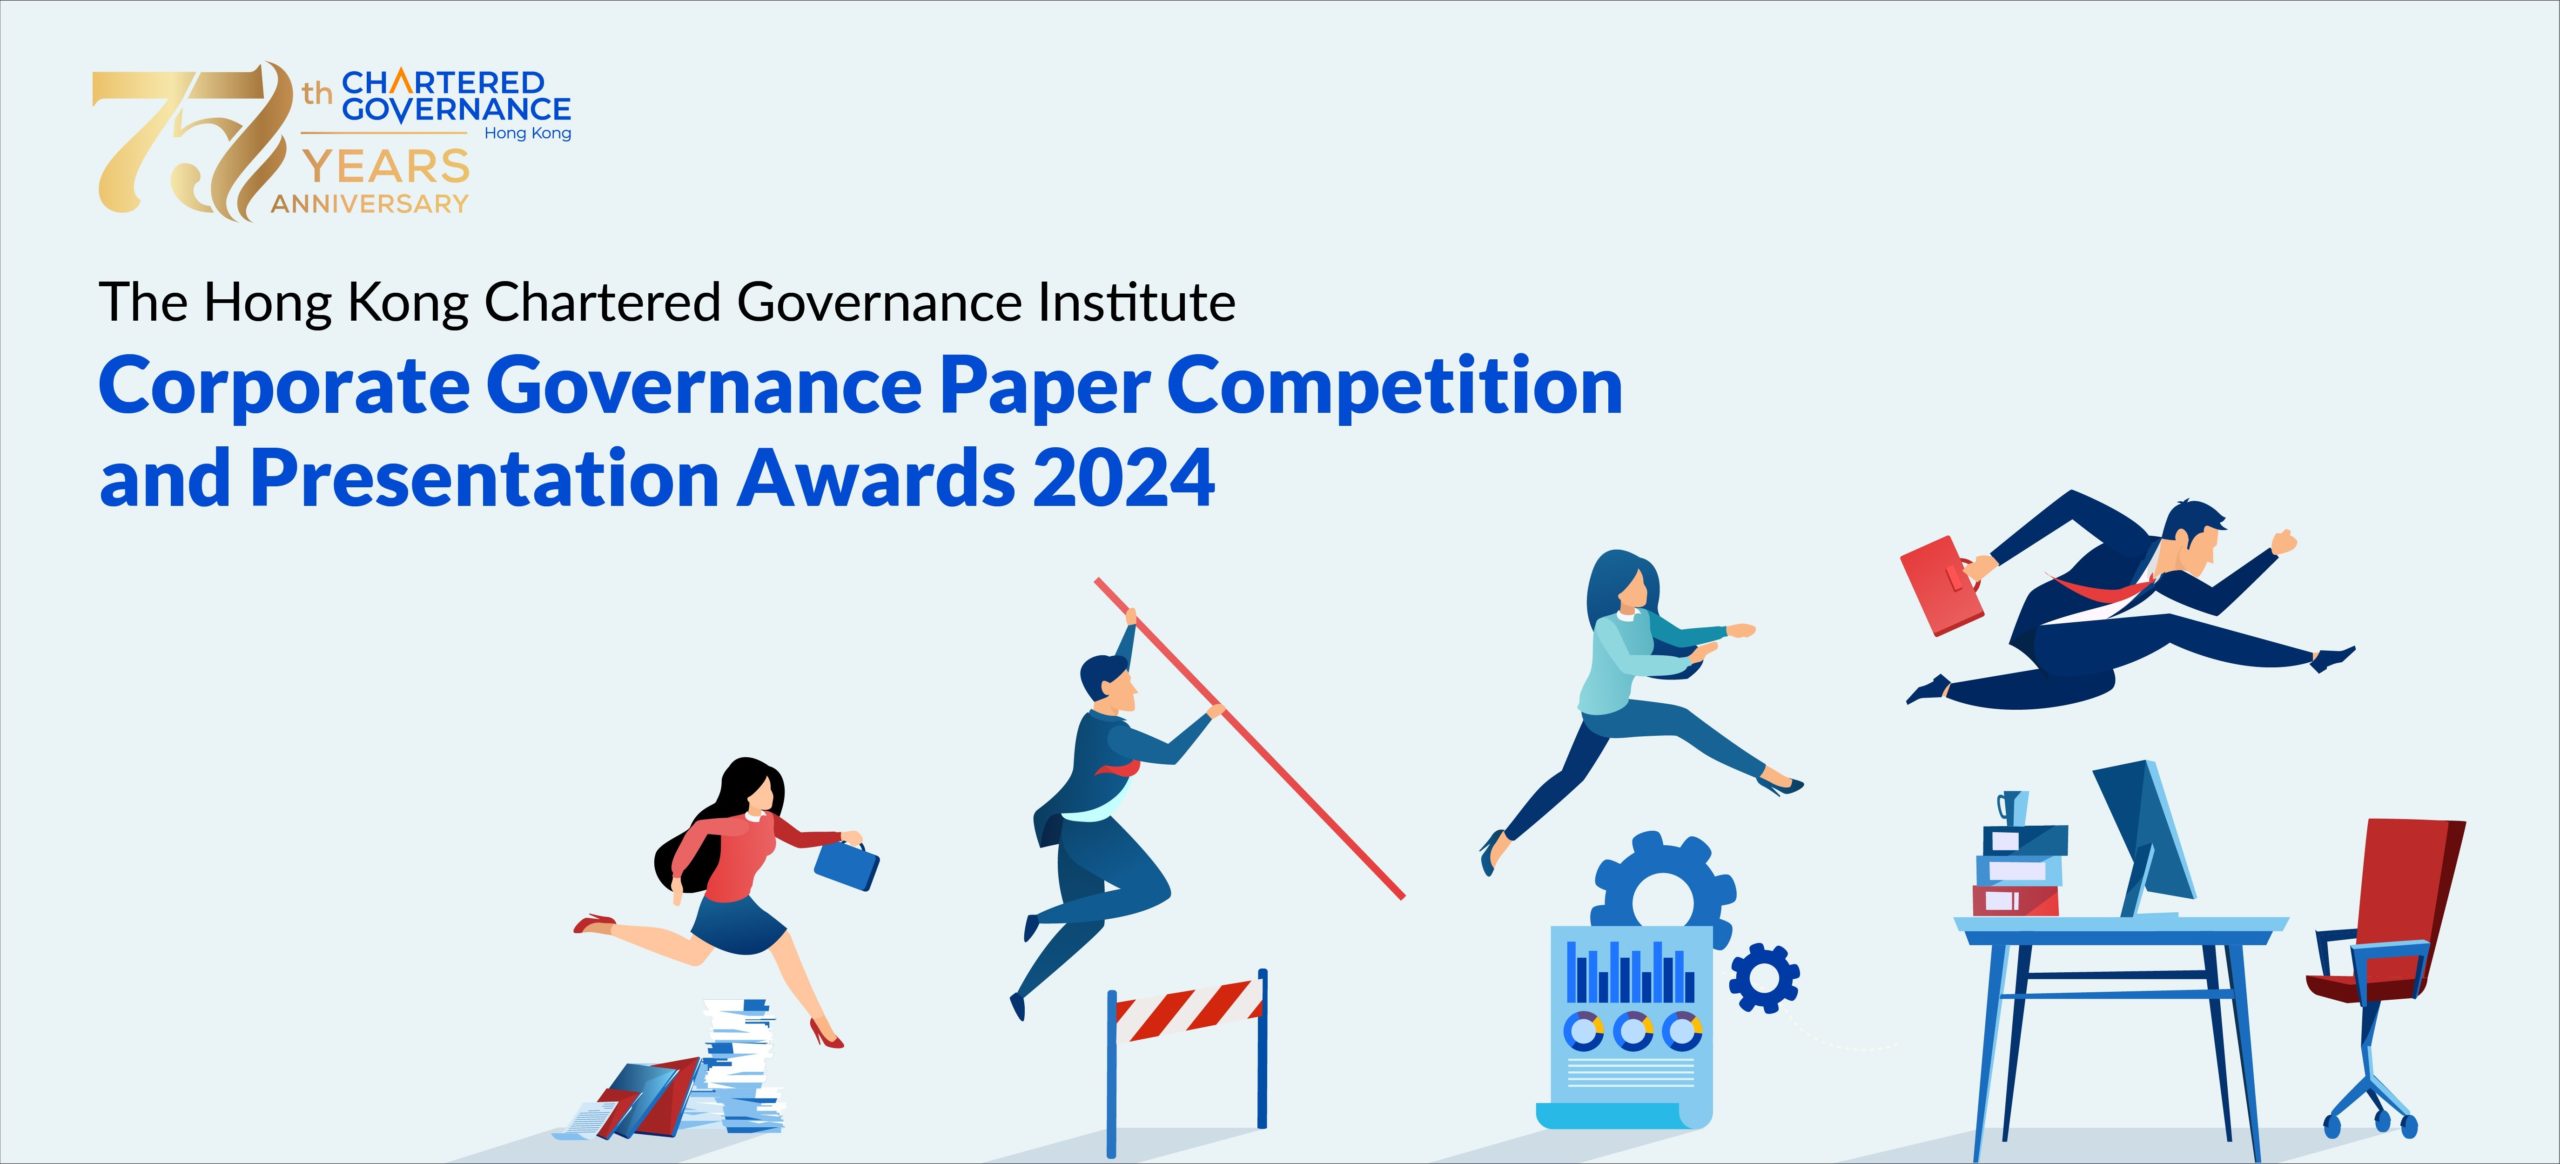 HKCGI Corporate Governance Paper Competition and Presentation Awards